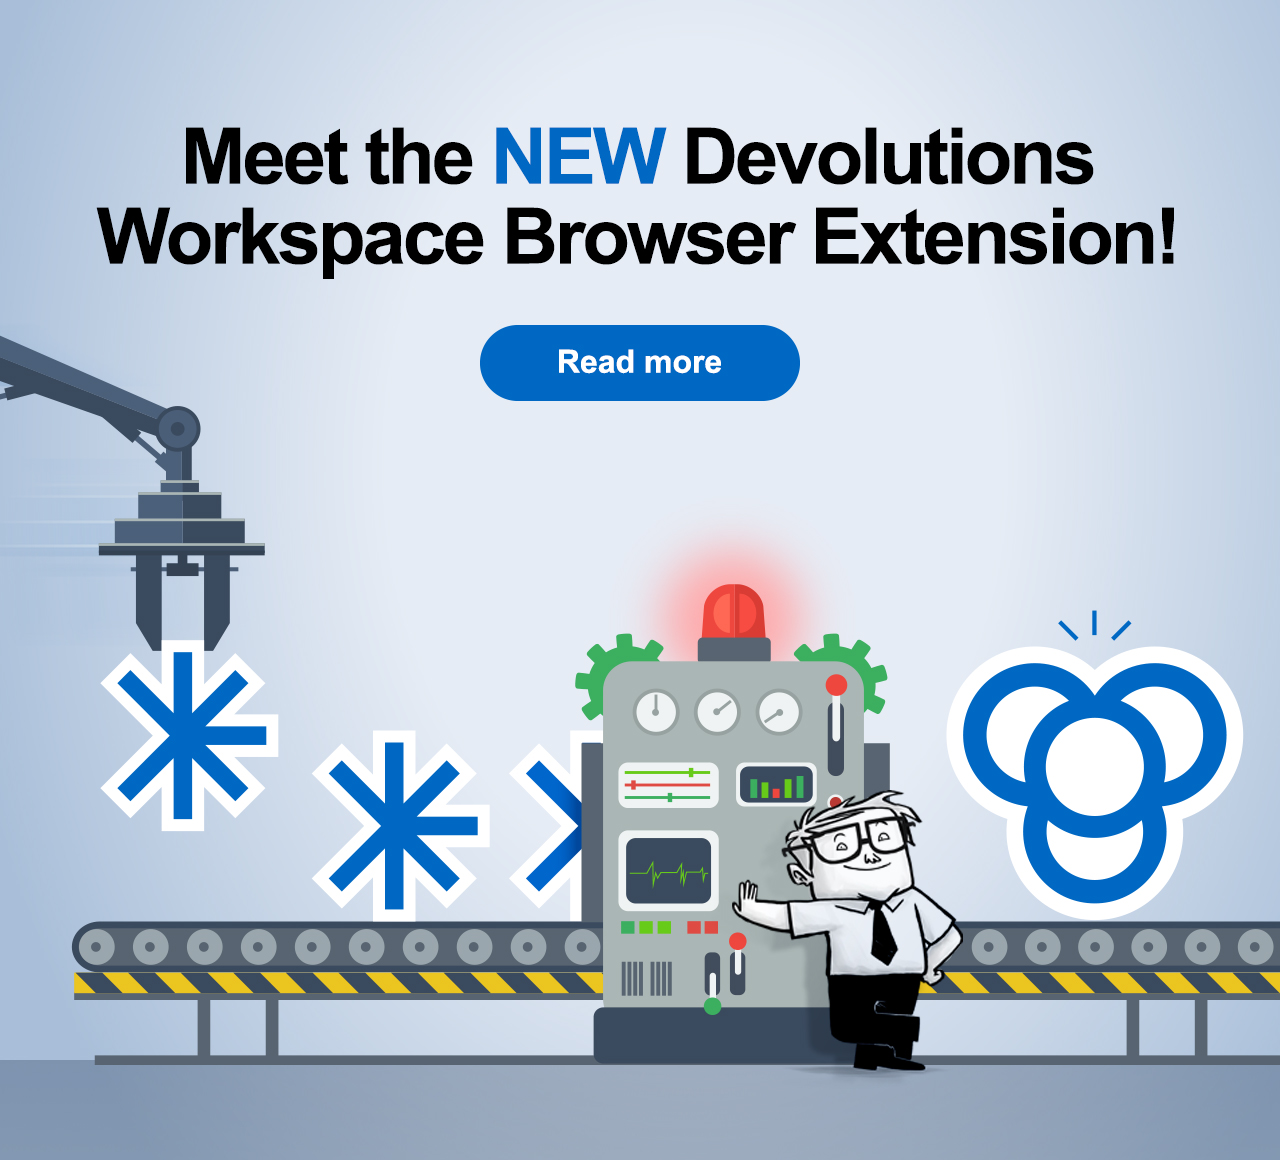 Meet the NEW Devolutions Workspace Browser Extension!